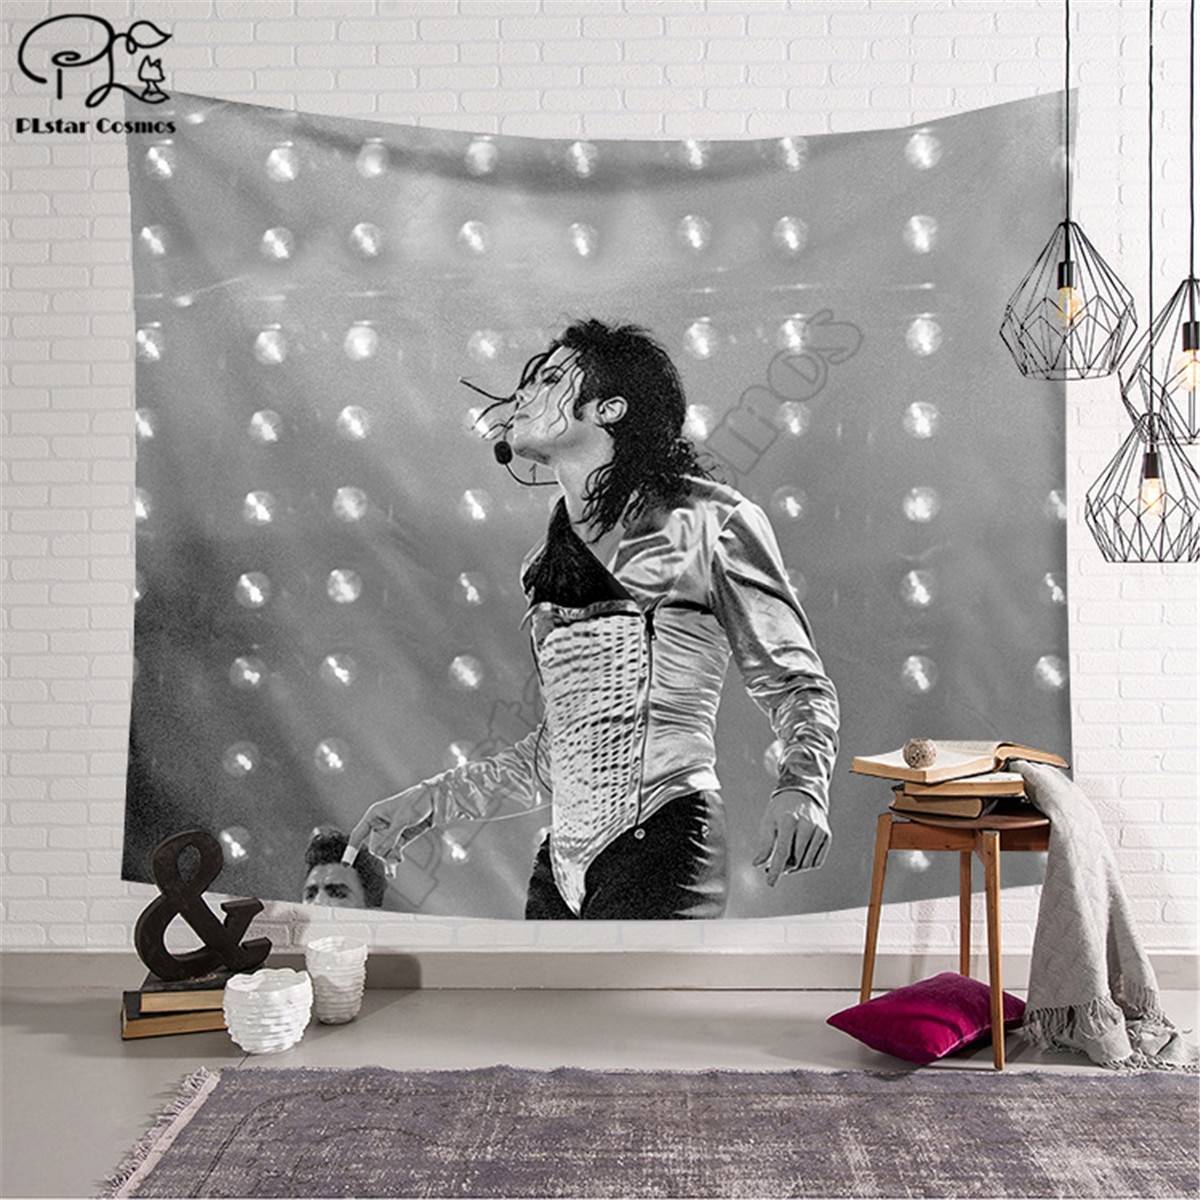 Michael Jackson pattern Funny cartoon Blanket Tapestry 3D Printed Tapestrying Rectangular Home Decor Wall Hanging style-3 Home Decor cb5feb1b7314637725a2e7: 1|2|3|4